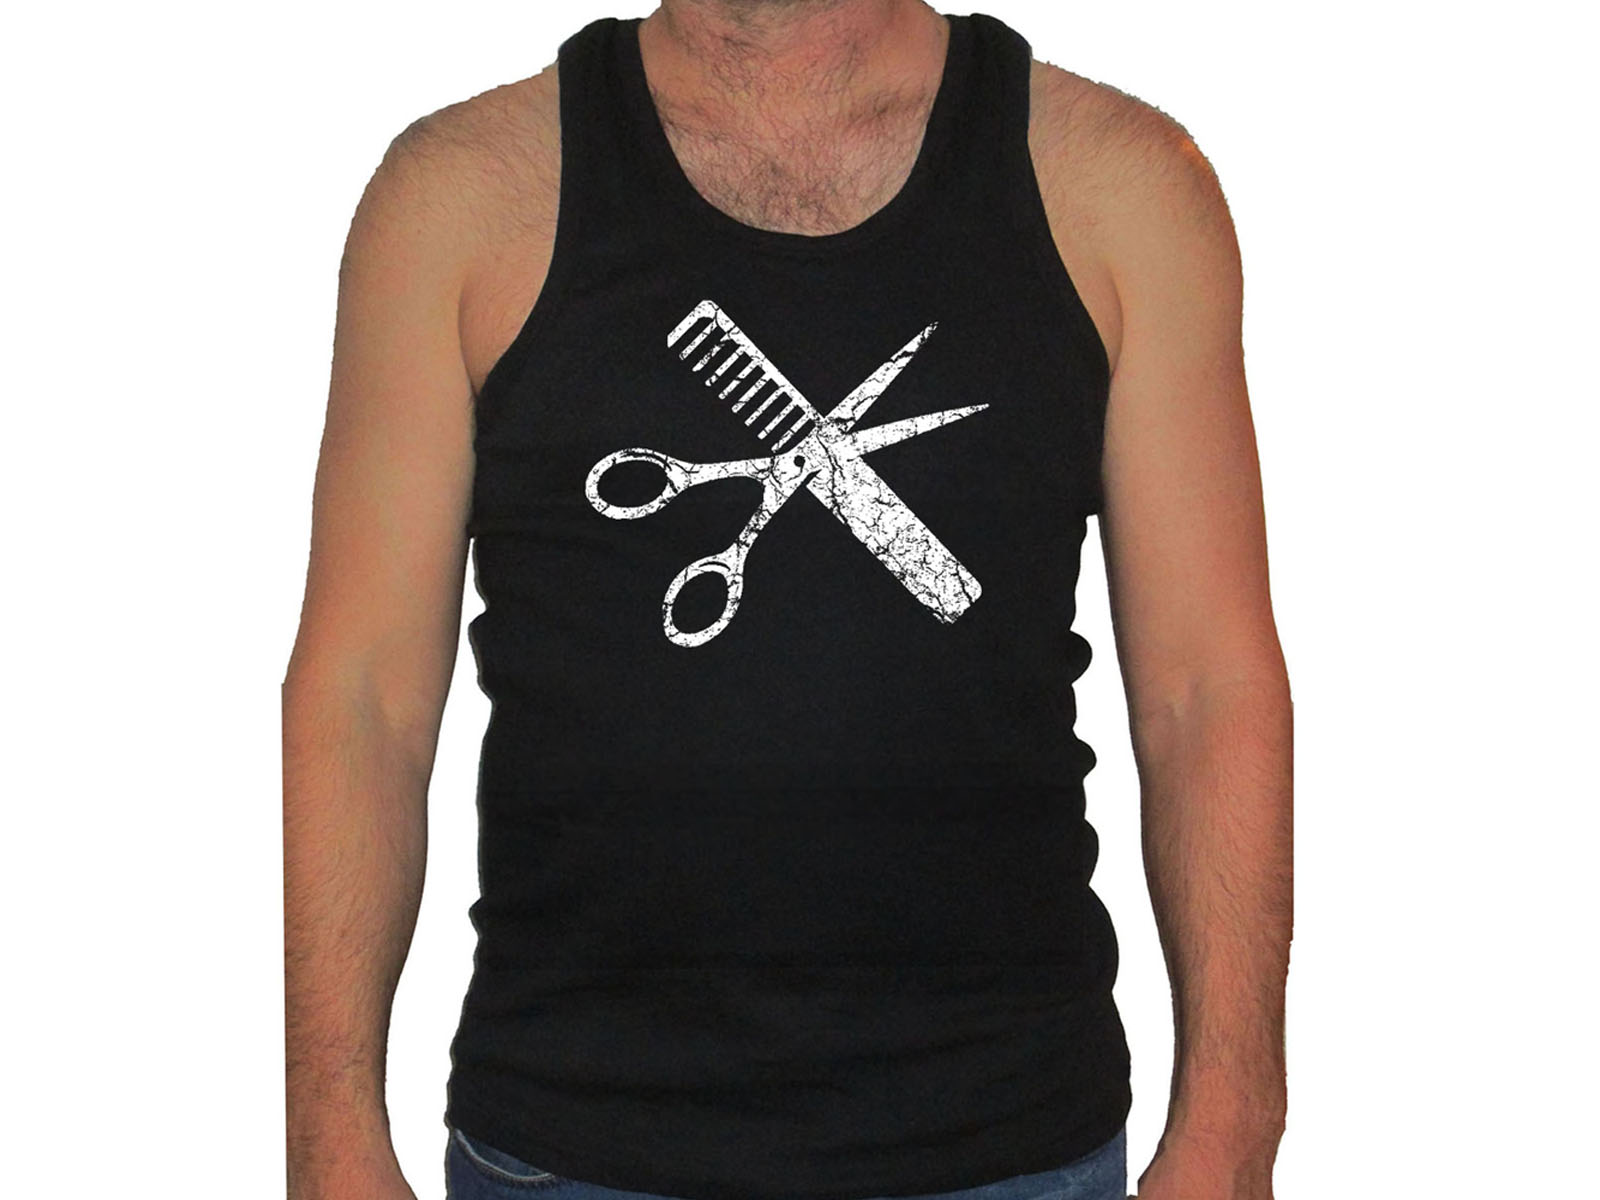 Hairstylist tools man muscle tank top